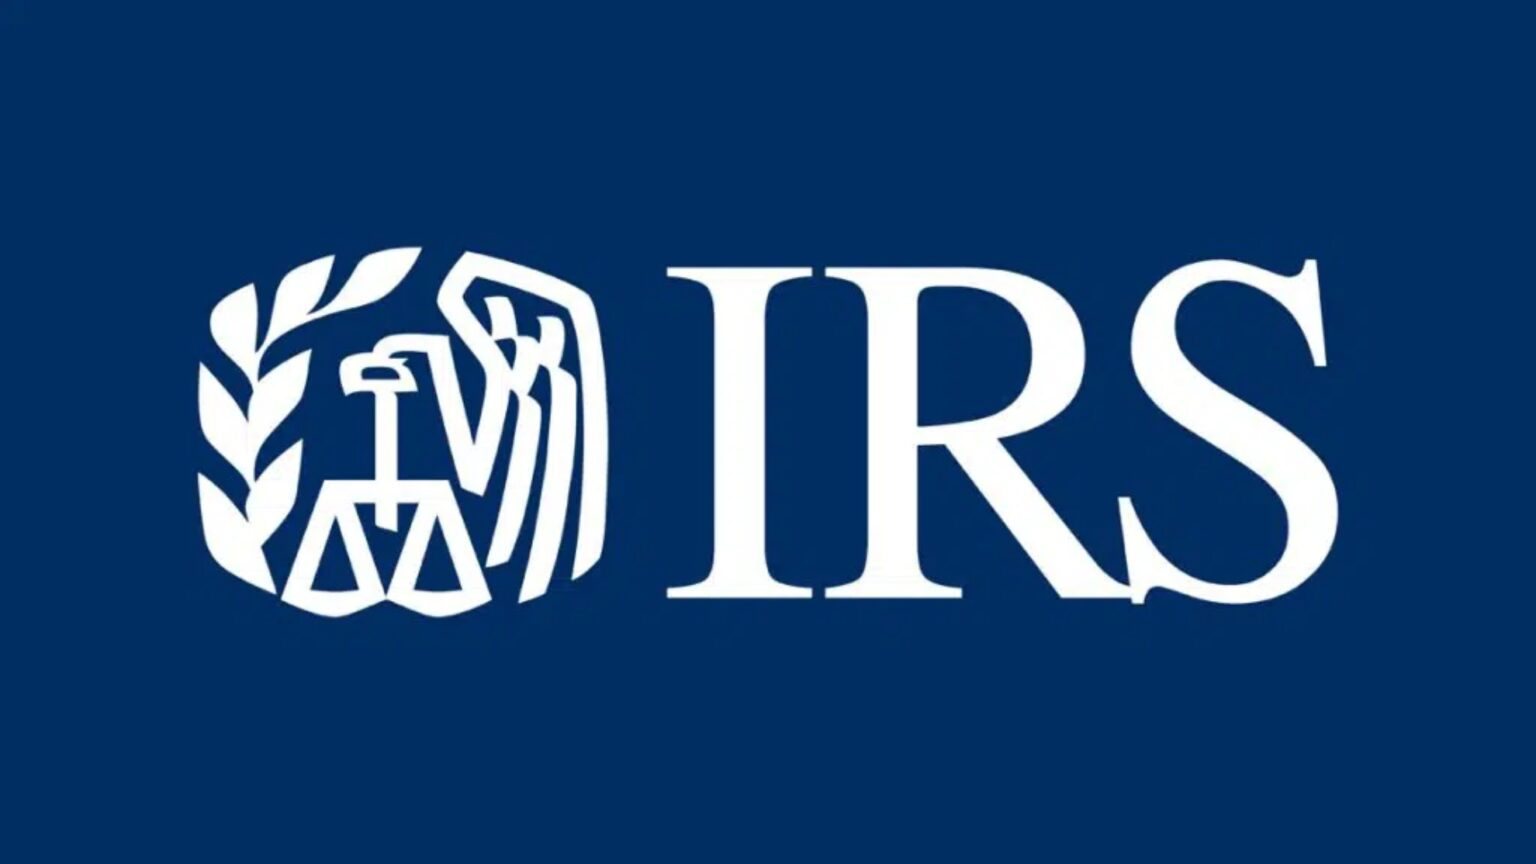 Irs Has Accepted Your Non Filers Enter Payment Info Return Here Tool